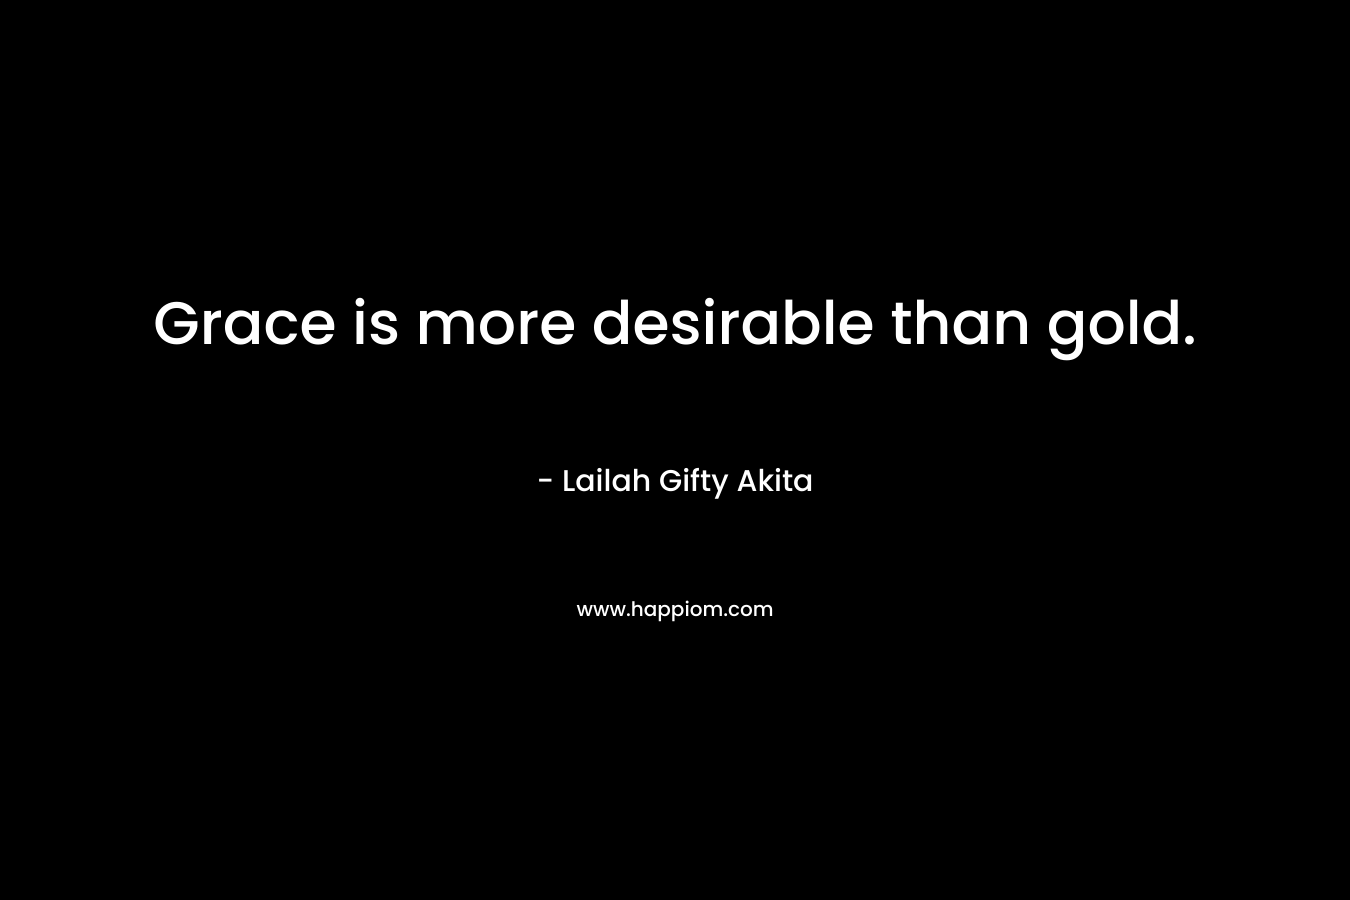 Grace is more desirable than gold.